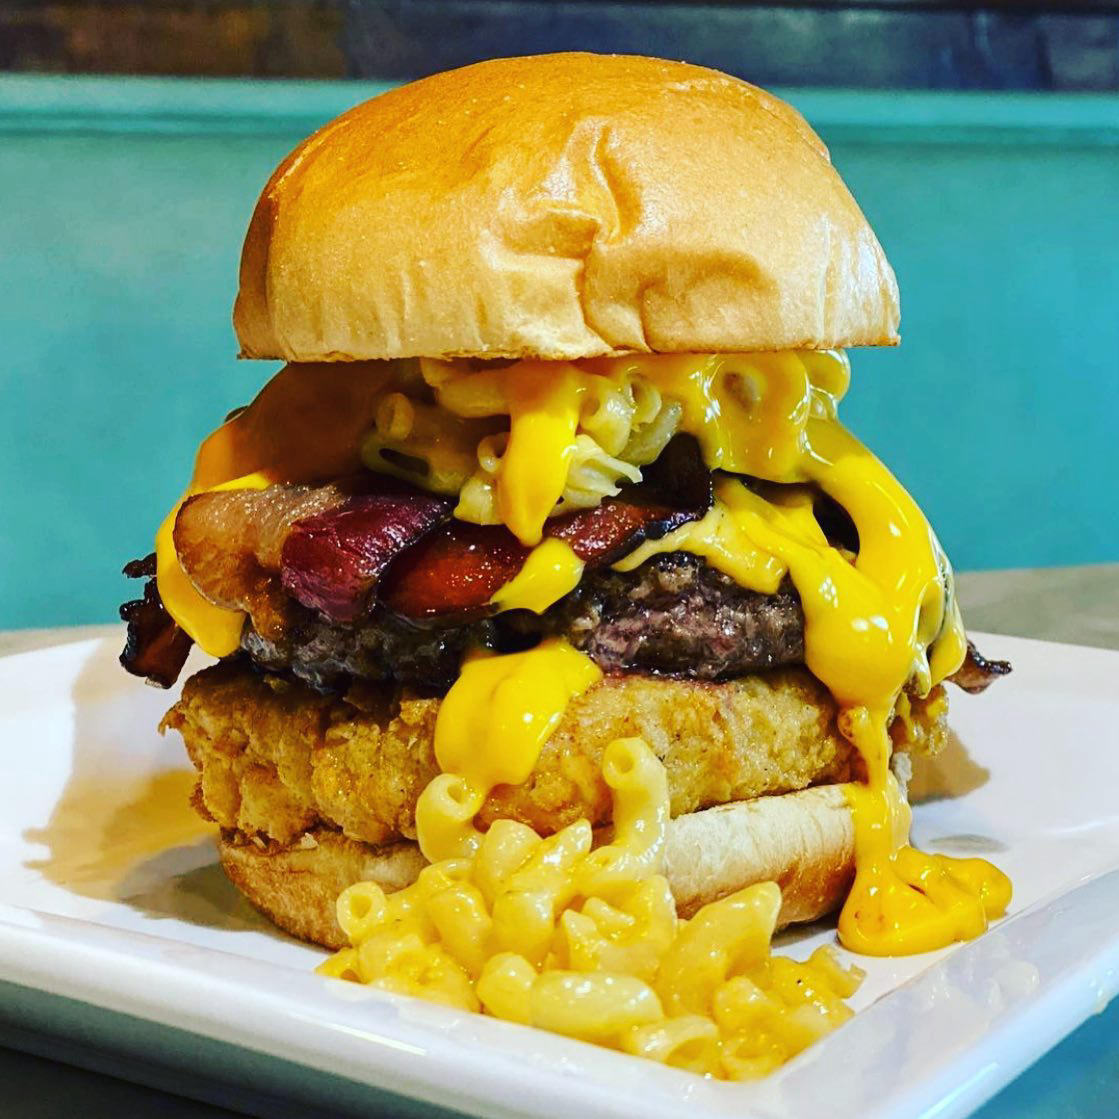 Burgerliscious - We’re just 9 days away from South Florida’s biggest, best, and juiciest #burger #fe